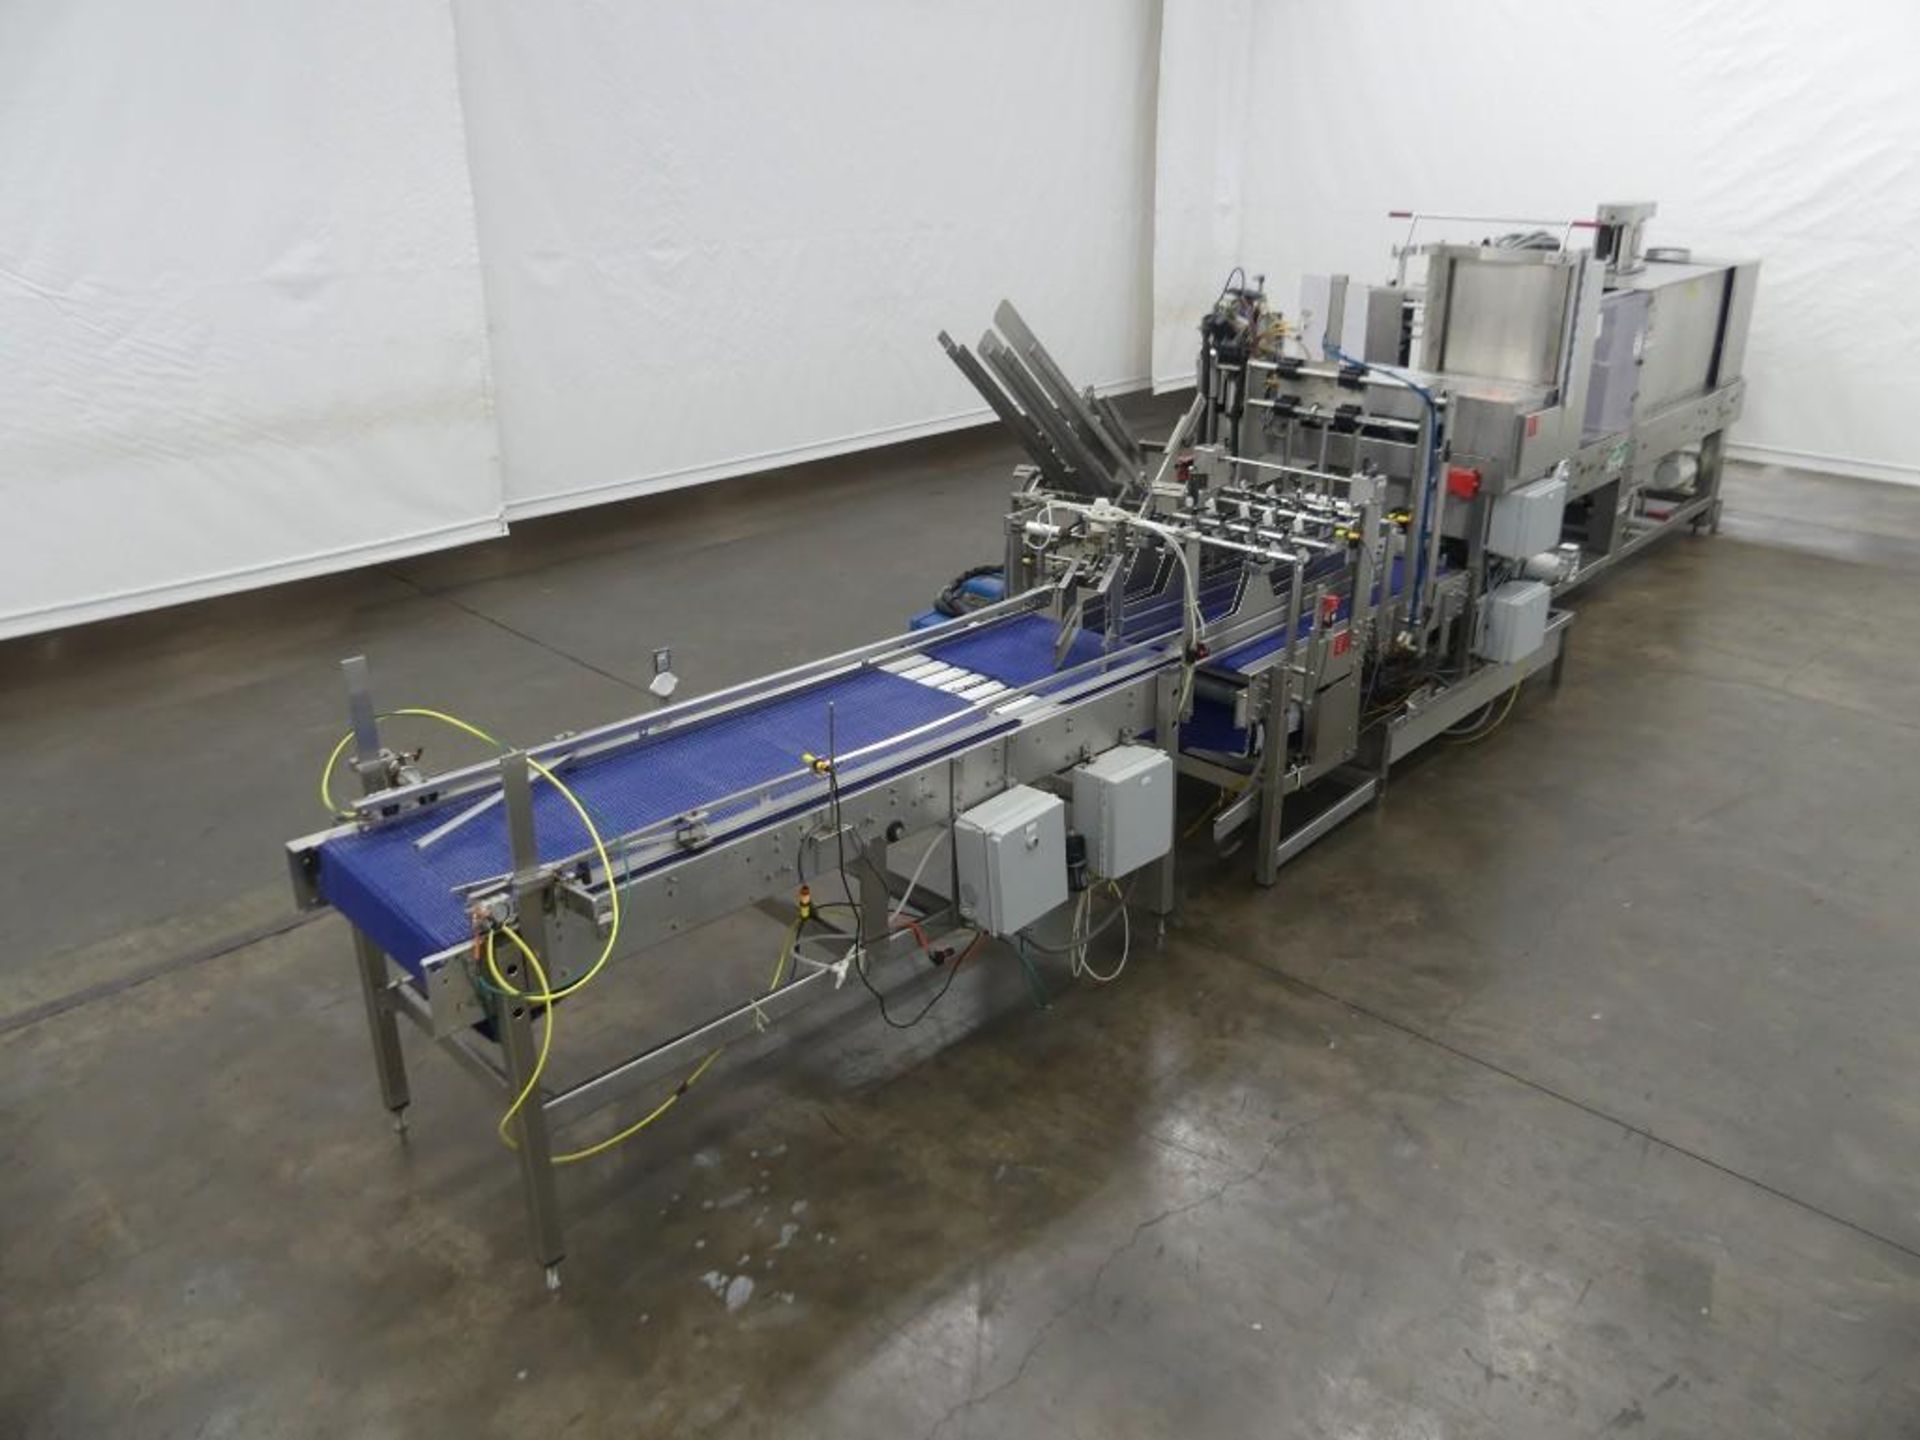 Arpac Delkor Spot-Pak 112-SS-24 Automatic Stainless Steel Shrink Bundler - Image 3 of 101